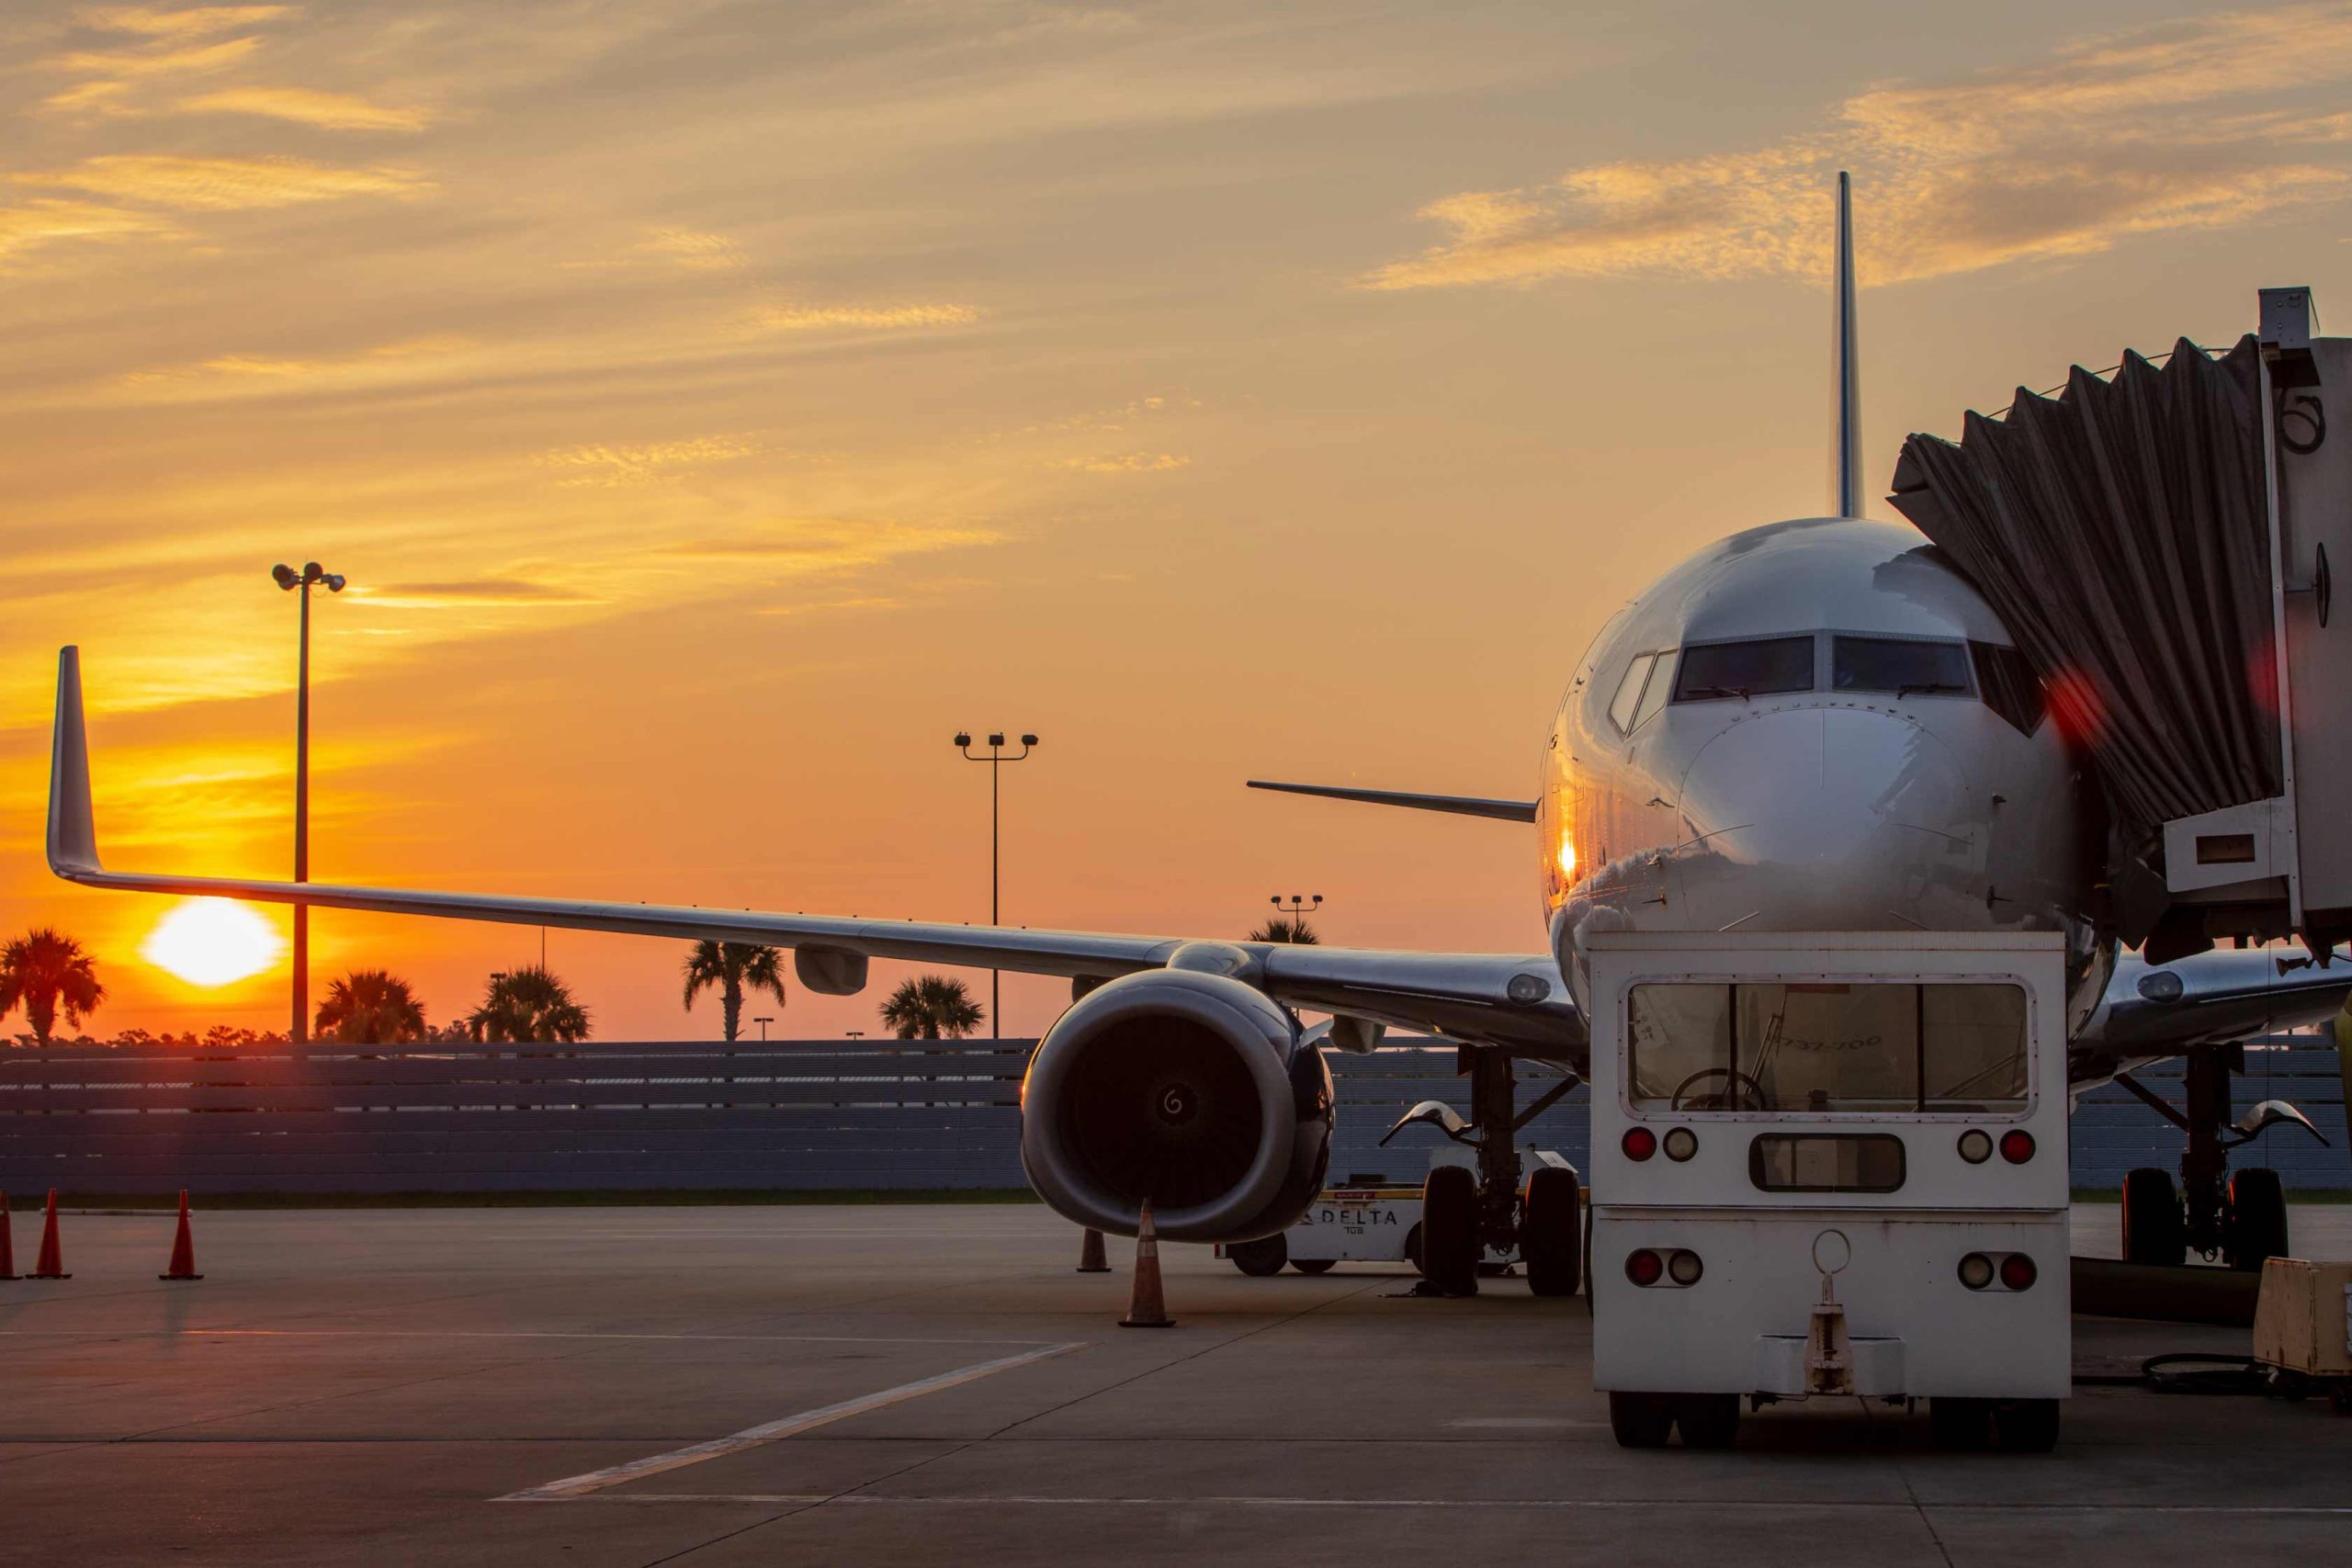 Photo of plane at VPS airport on tarmac at gate against sunset